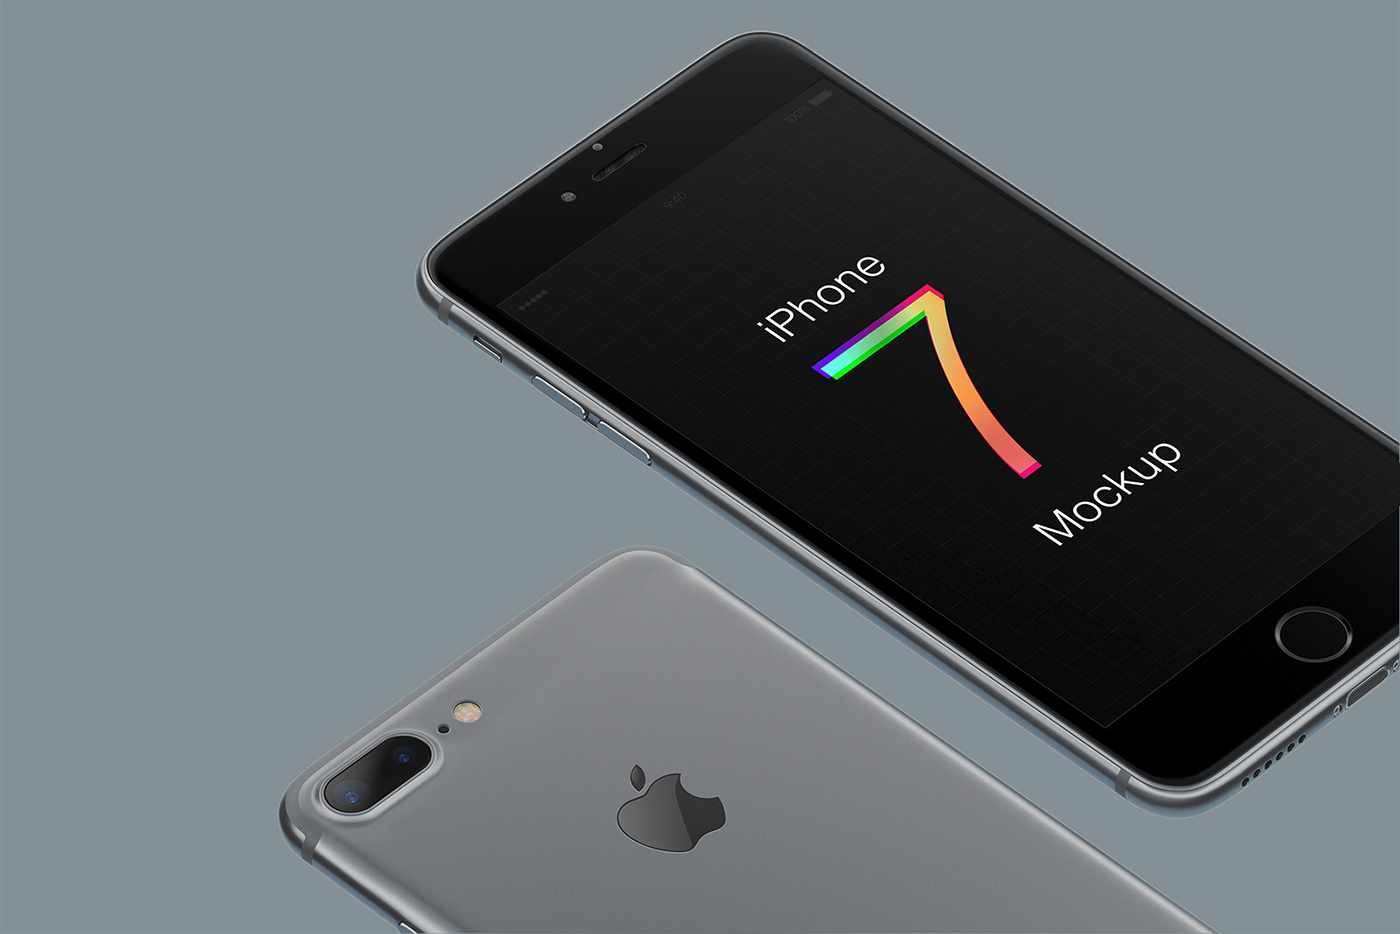 iPhone 7 mockup free freebie mock-up download iphone Iphone7 photoshop psd sketch